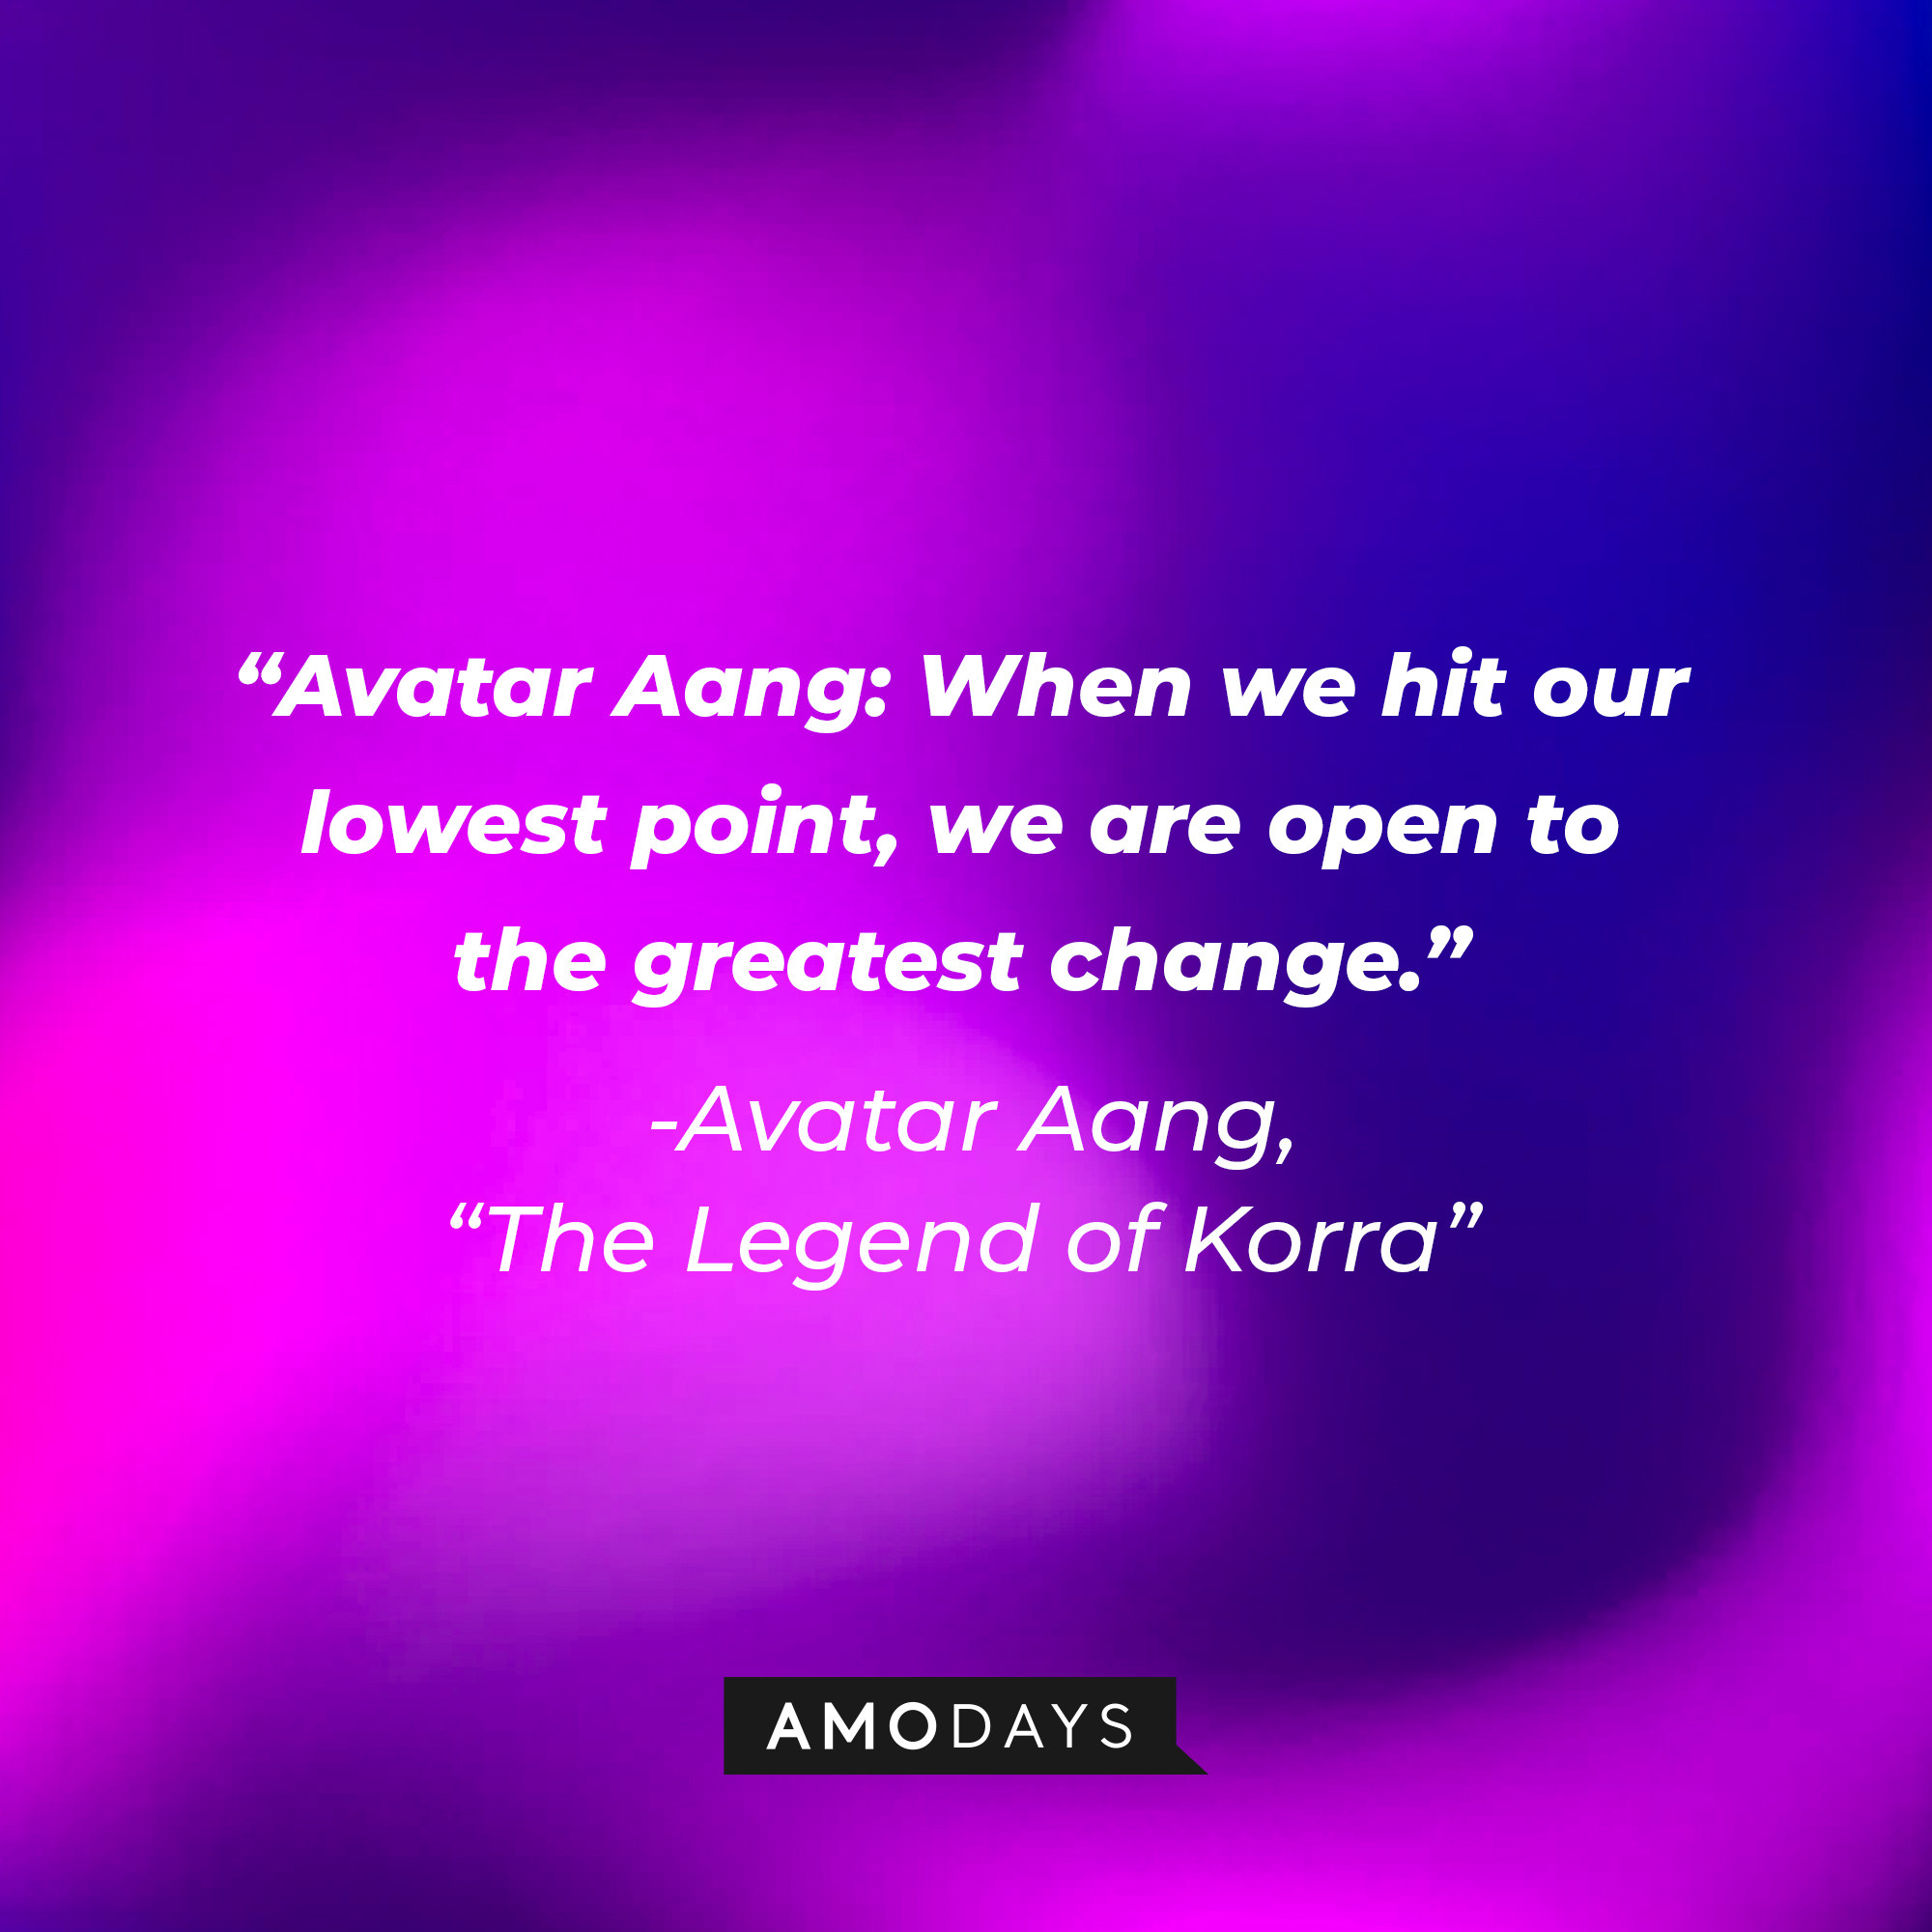 Avatar Aang’s quote in “Avatar: The Legend of Korra:” “When we hit our lowest point, we are open to the greatest change." | Source: Amodays